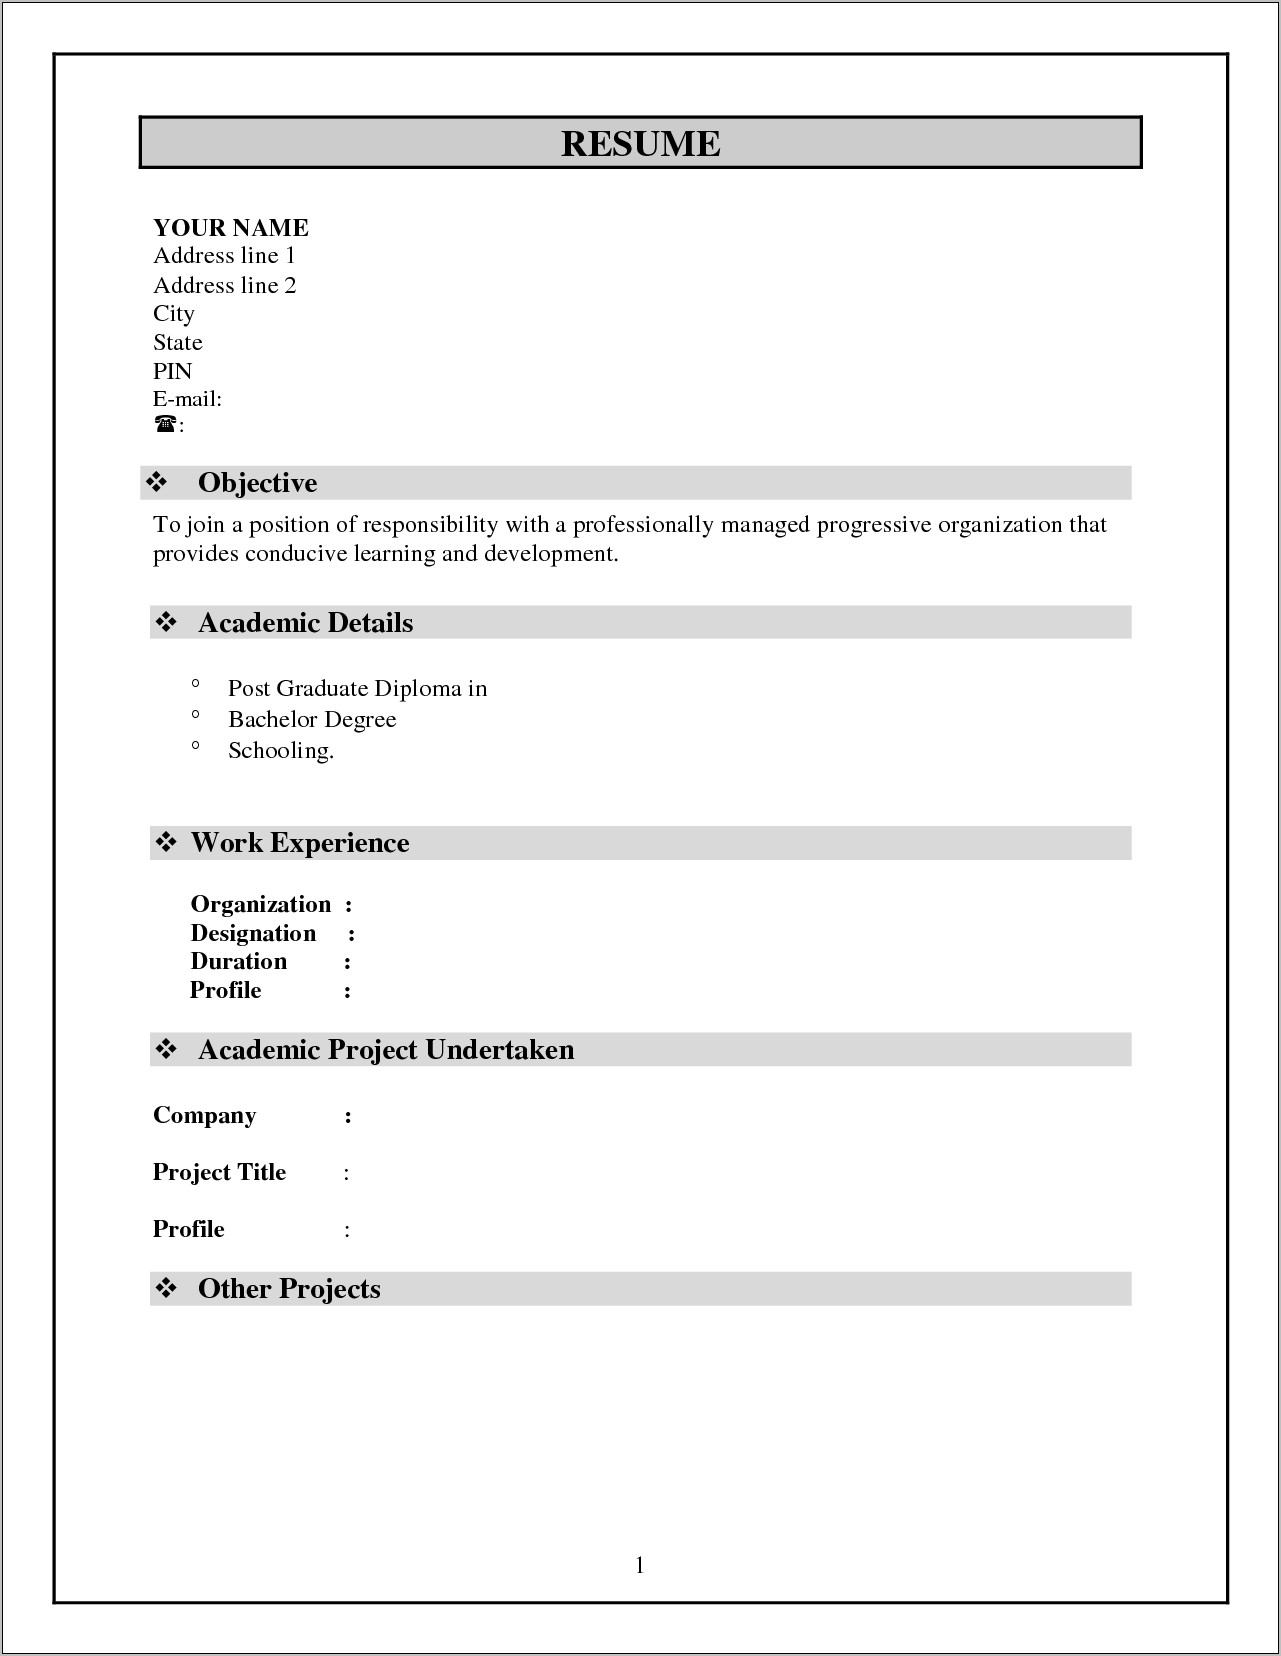 Resume Format For Freshers Free Download Pdf